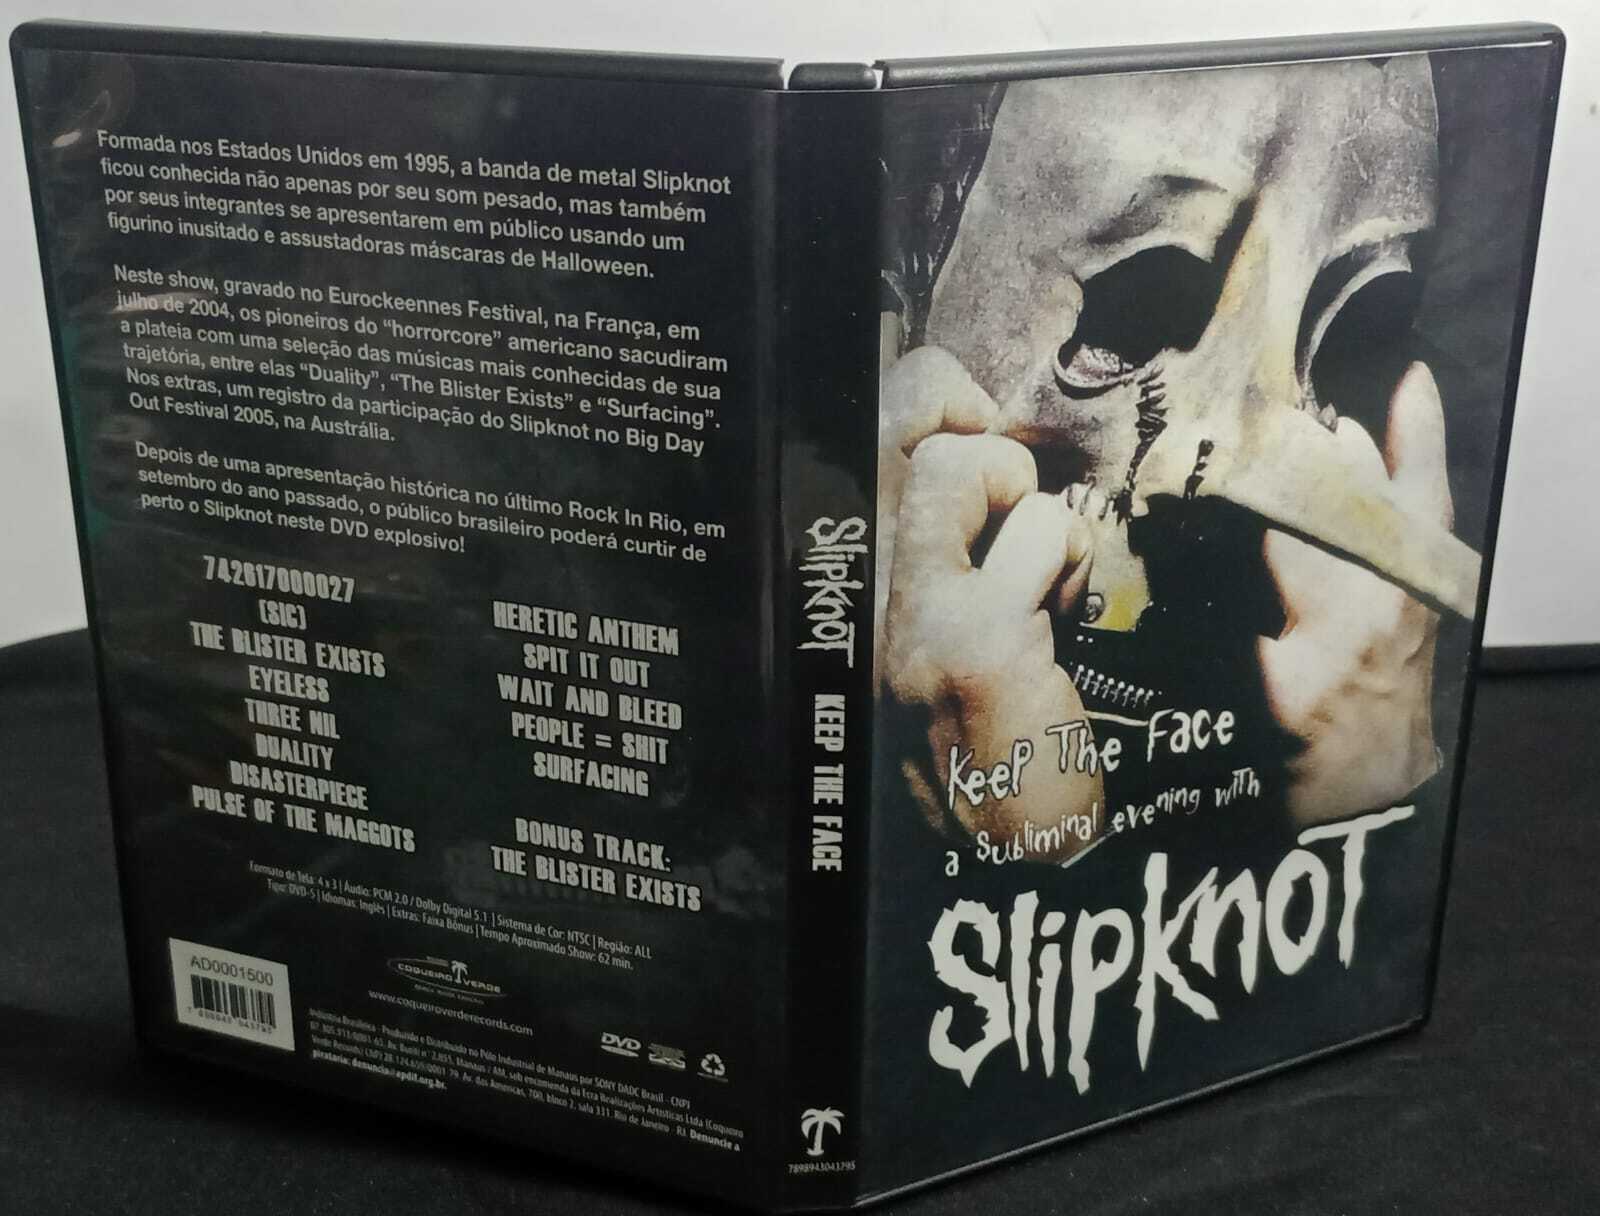 DVD - Slipknot - Keep the Face a Subliminal Evening With